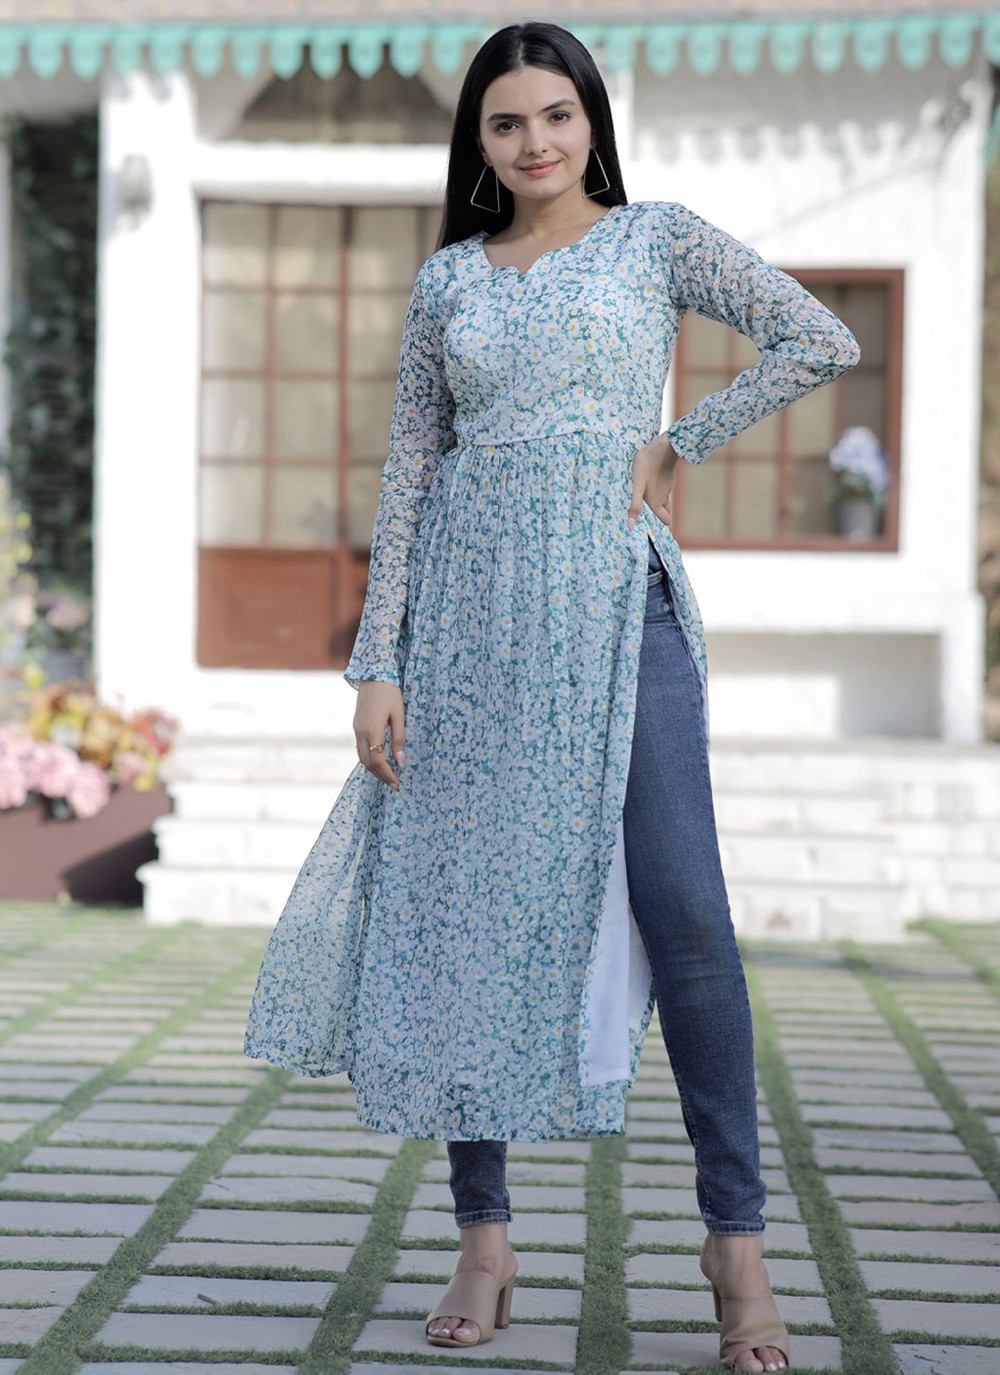 Complete your look with Elegant Silk Kurti Designs | Libas